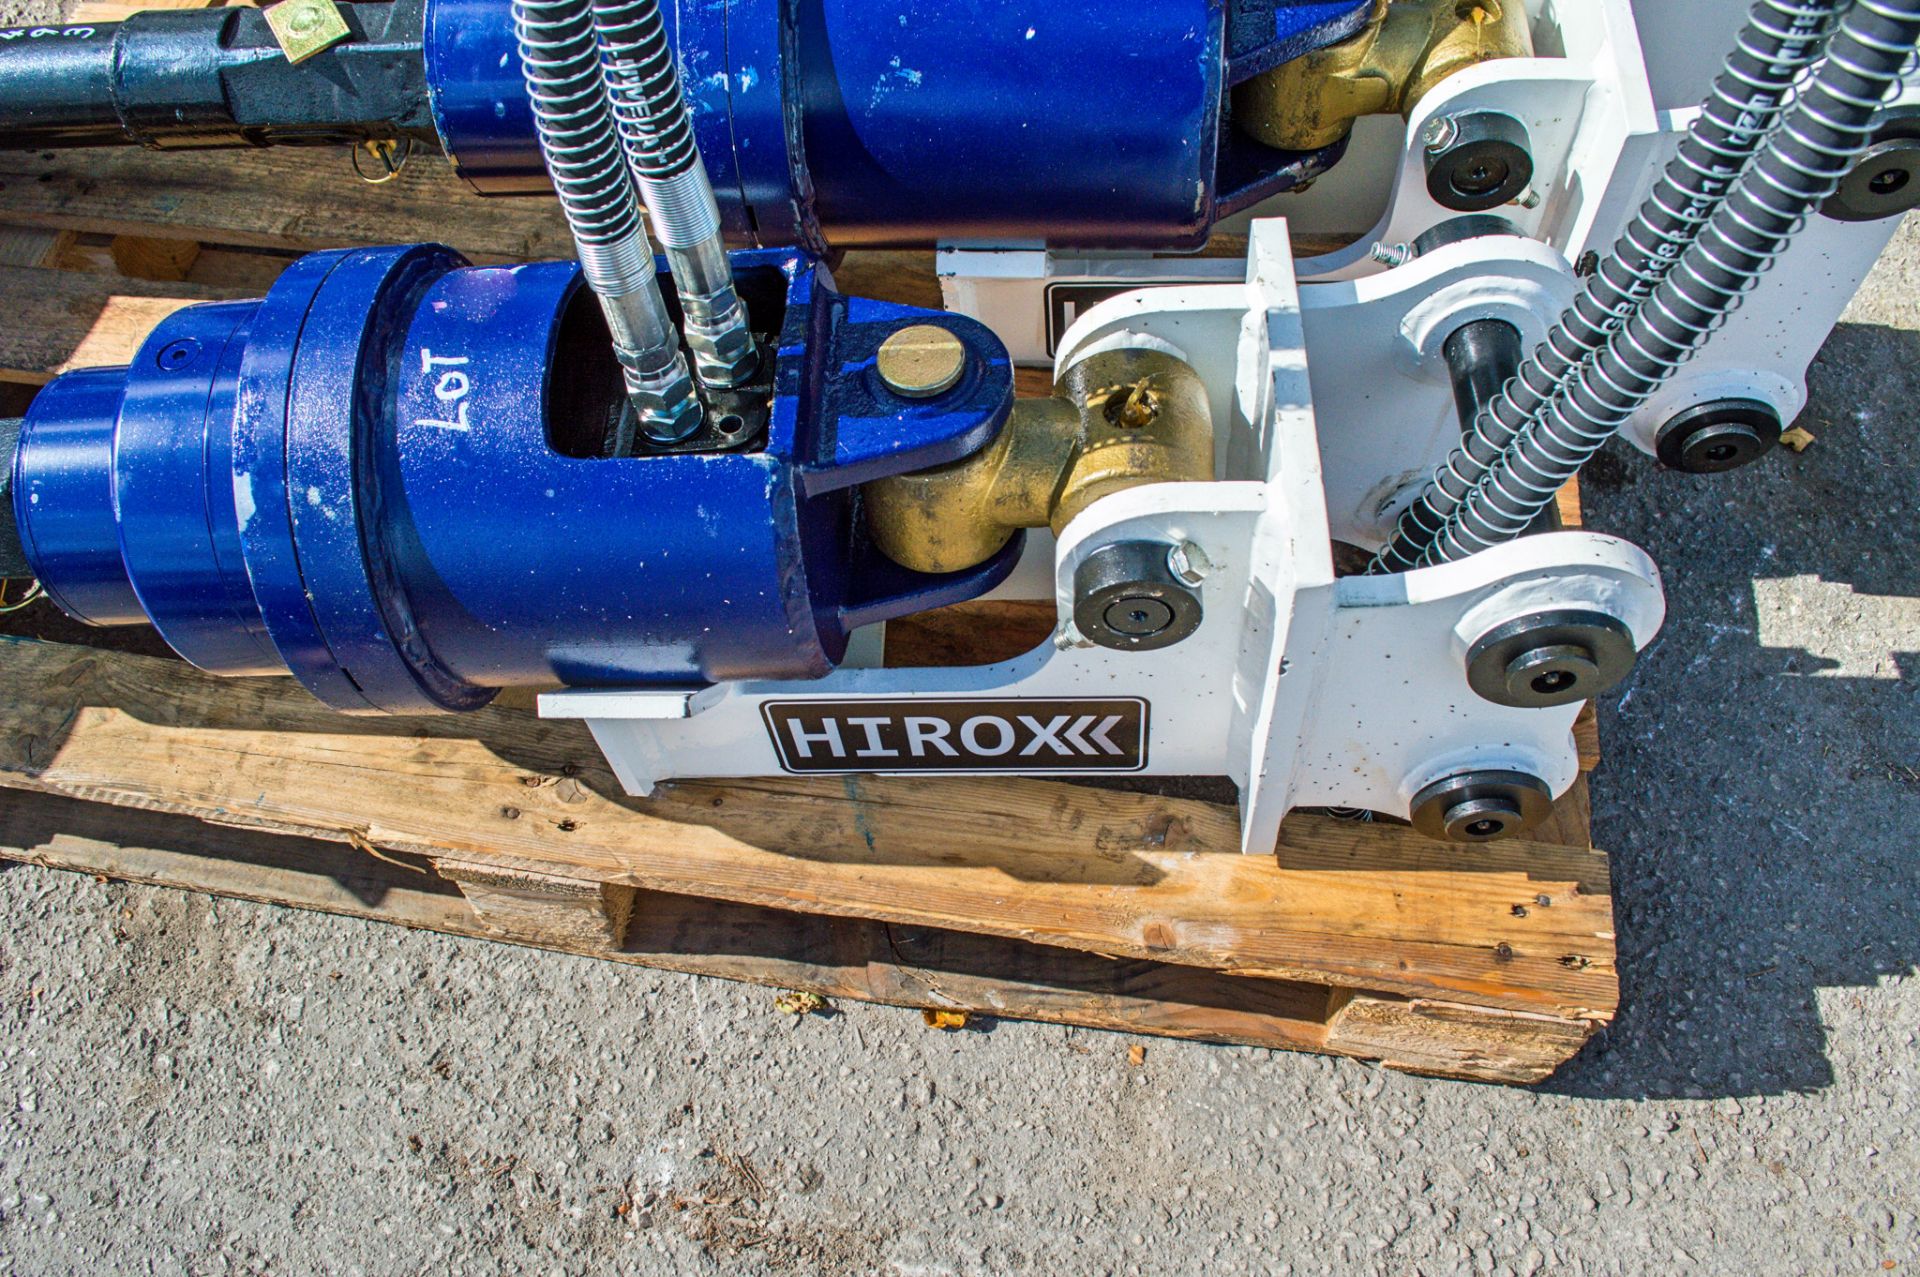 Hirox hydraulic auger attachment to suit 3 tonne excavator ** New & unused ** - Image 3 of 3